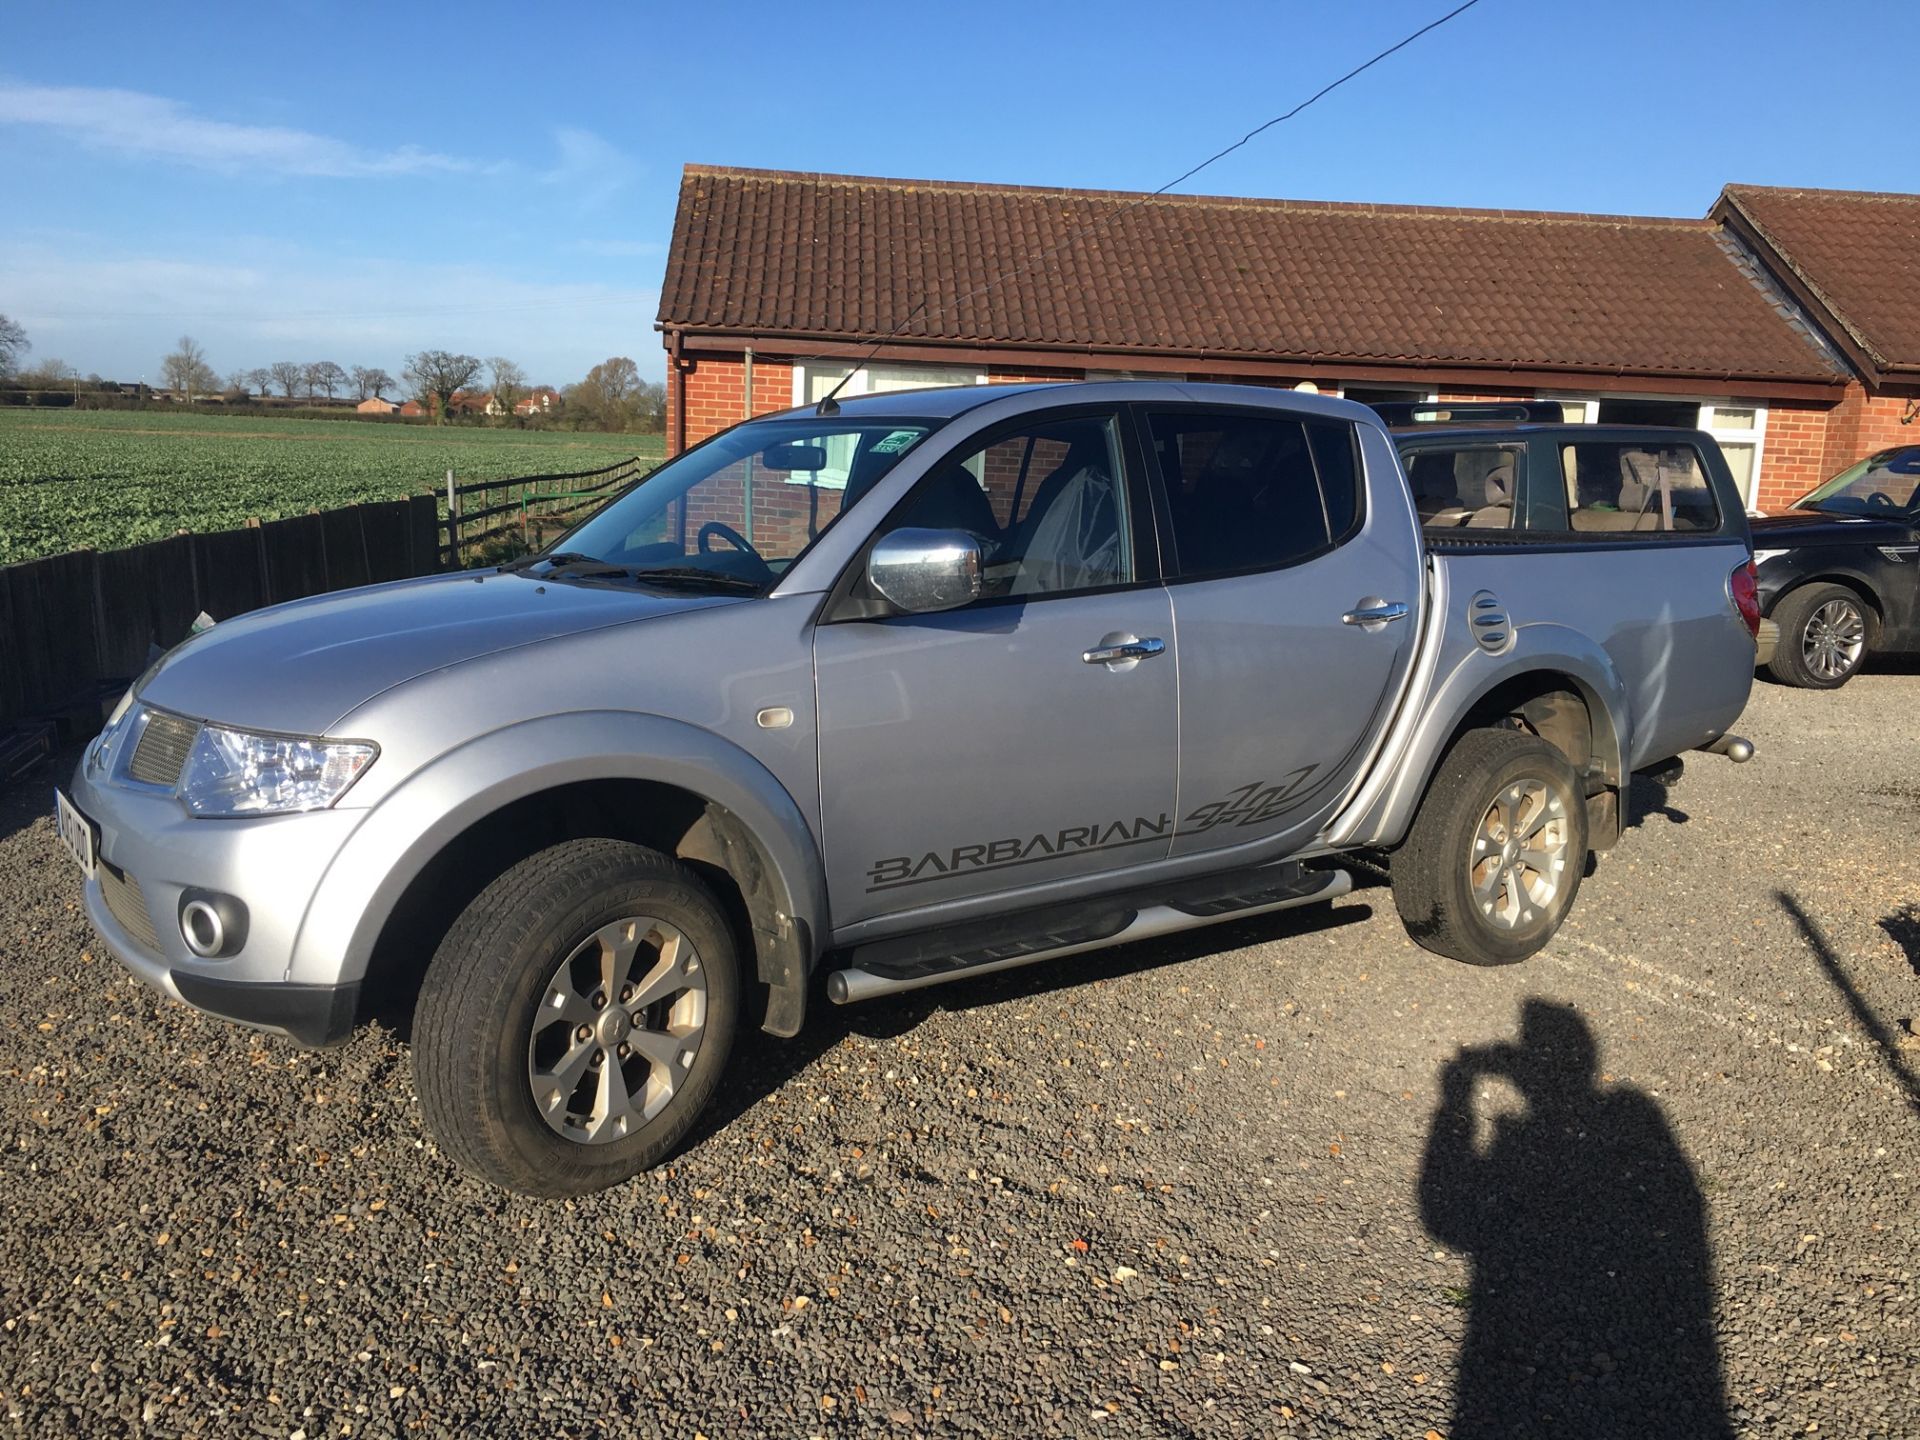 2013 13 reg MITSUBISHI BARBARIAN 4X4 DOUBLE CAB PICK UP TRUCK 1 OWNER FROM NEW, LOW MILEAGE 24k - Image 5 of 22